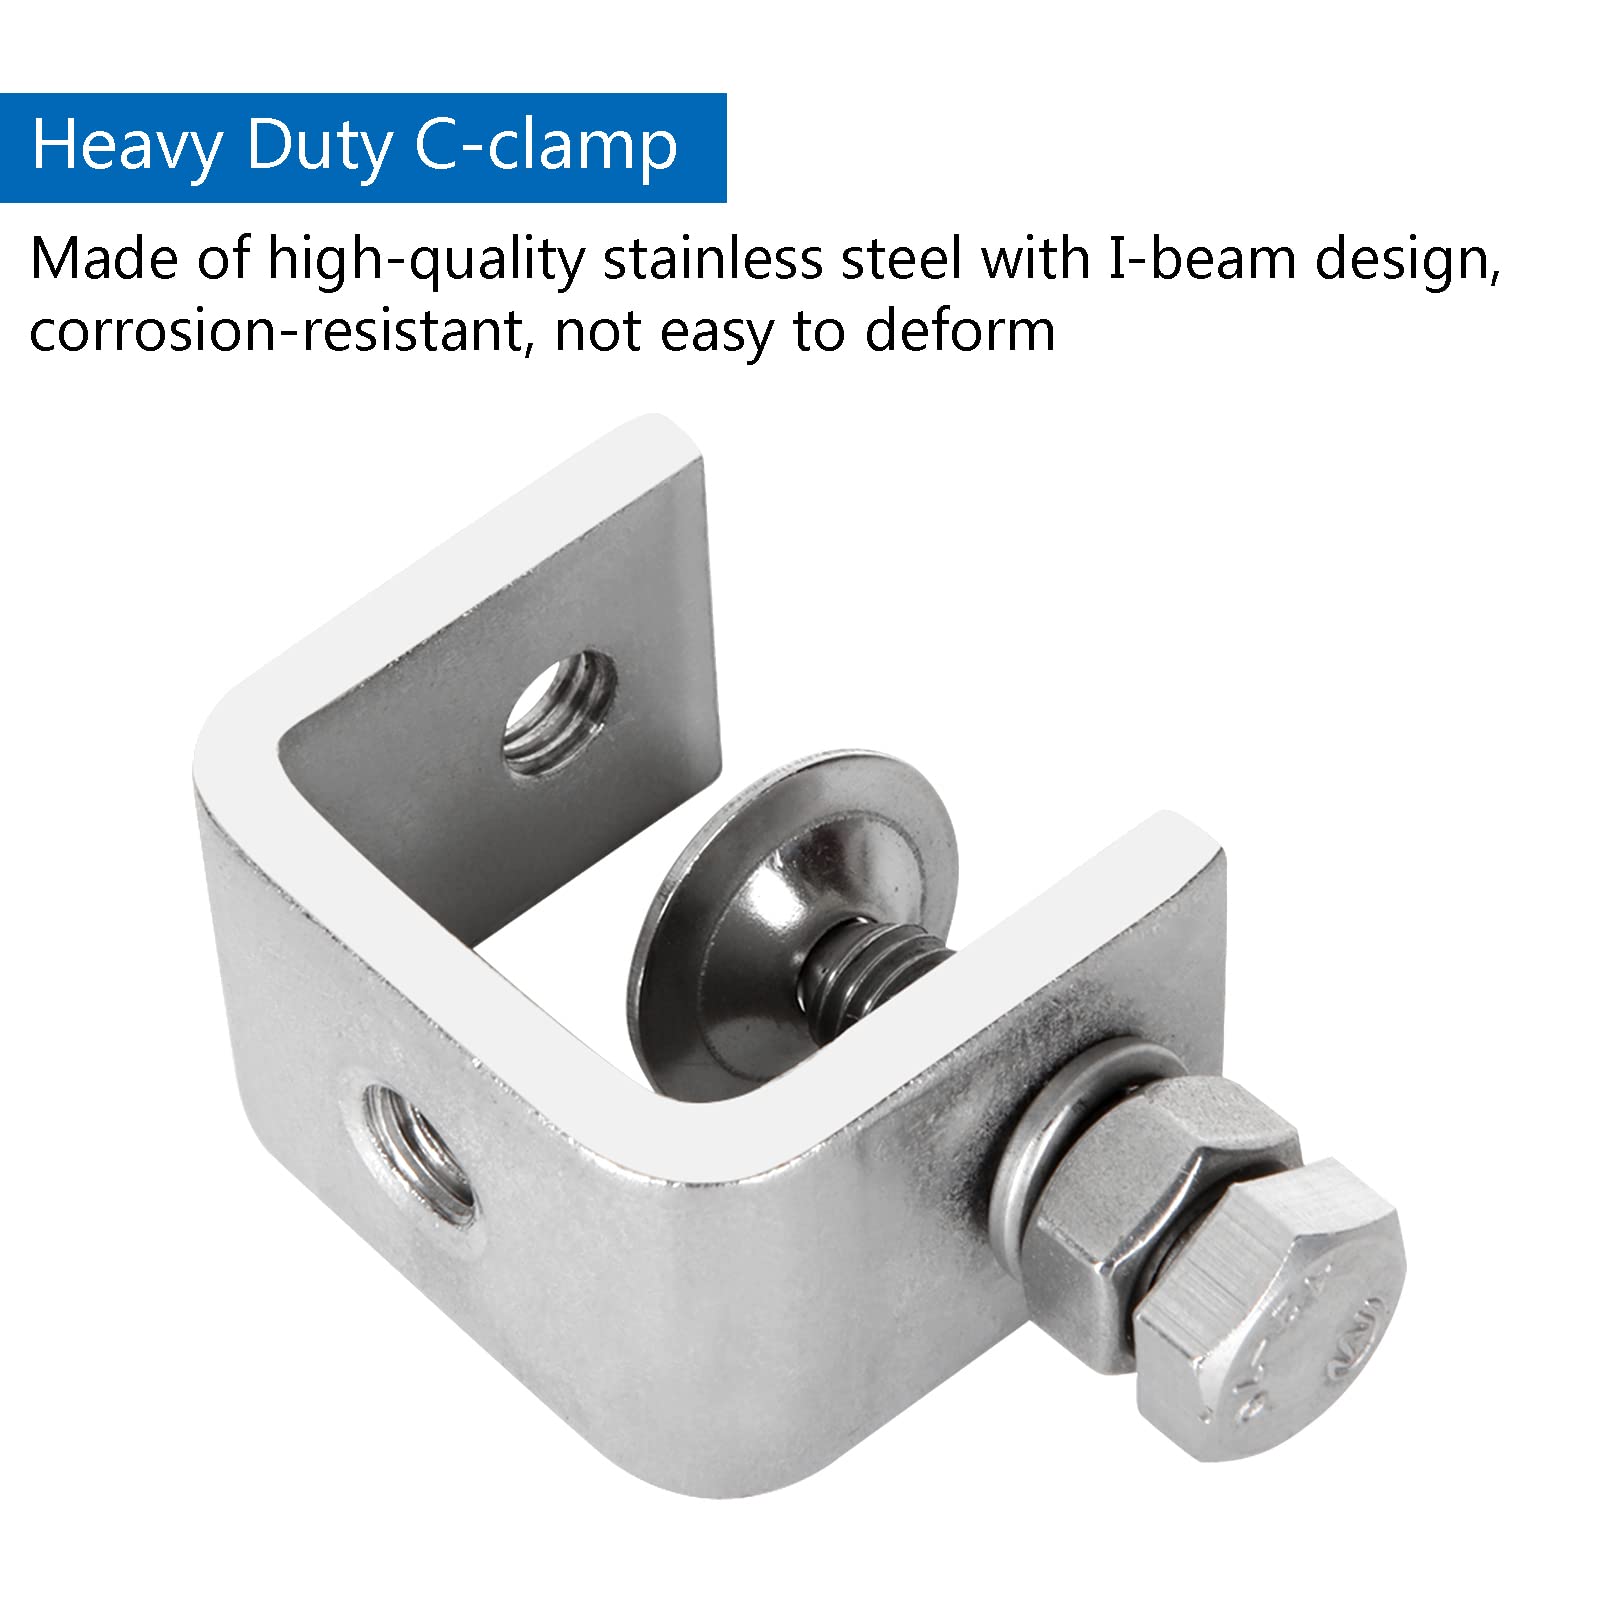 FVIEXE Small C Clamps, Heavy Duty C-Clamp 304 Stainless Steel with Stable Wide Jaw Opening & I Beam Design, Mini 1 Inch C Clamp, Desk Woodworking Clamp Tiger Clamp, Clamping Range 16-25mm